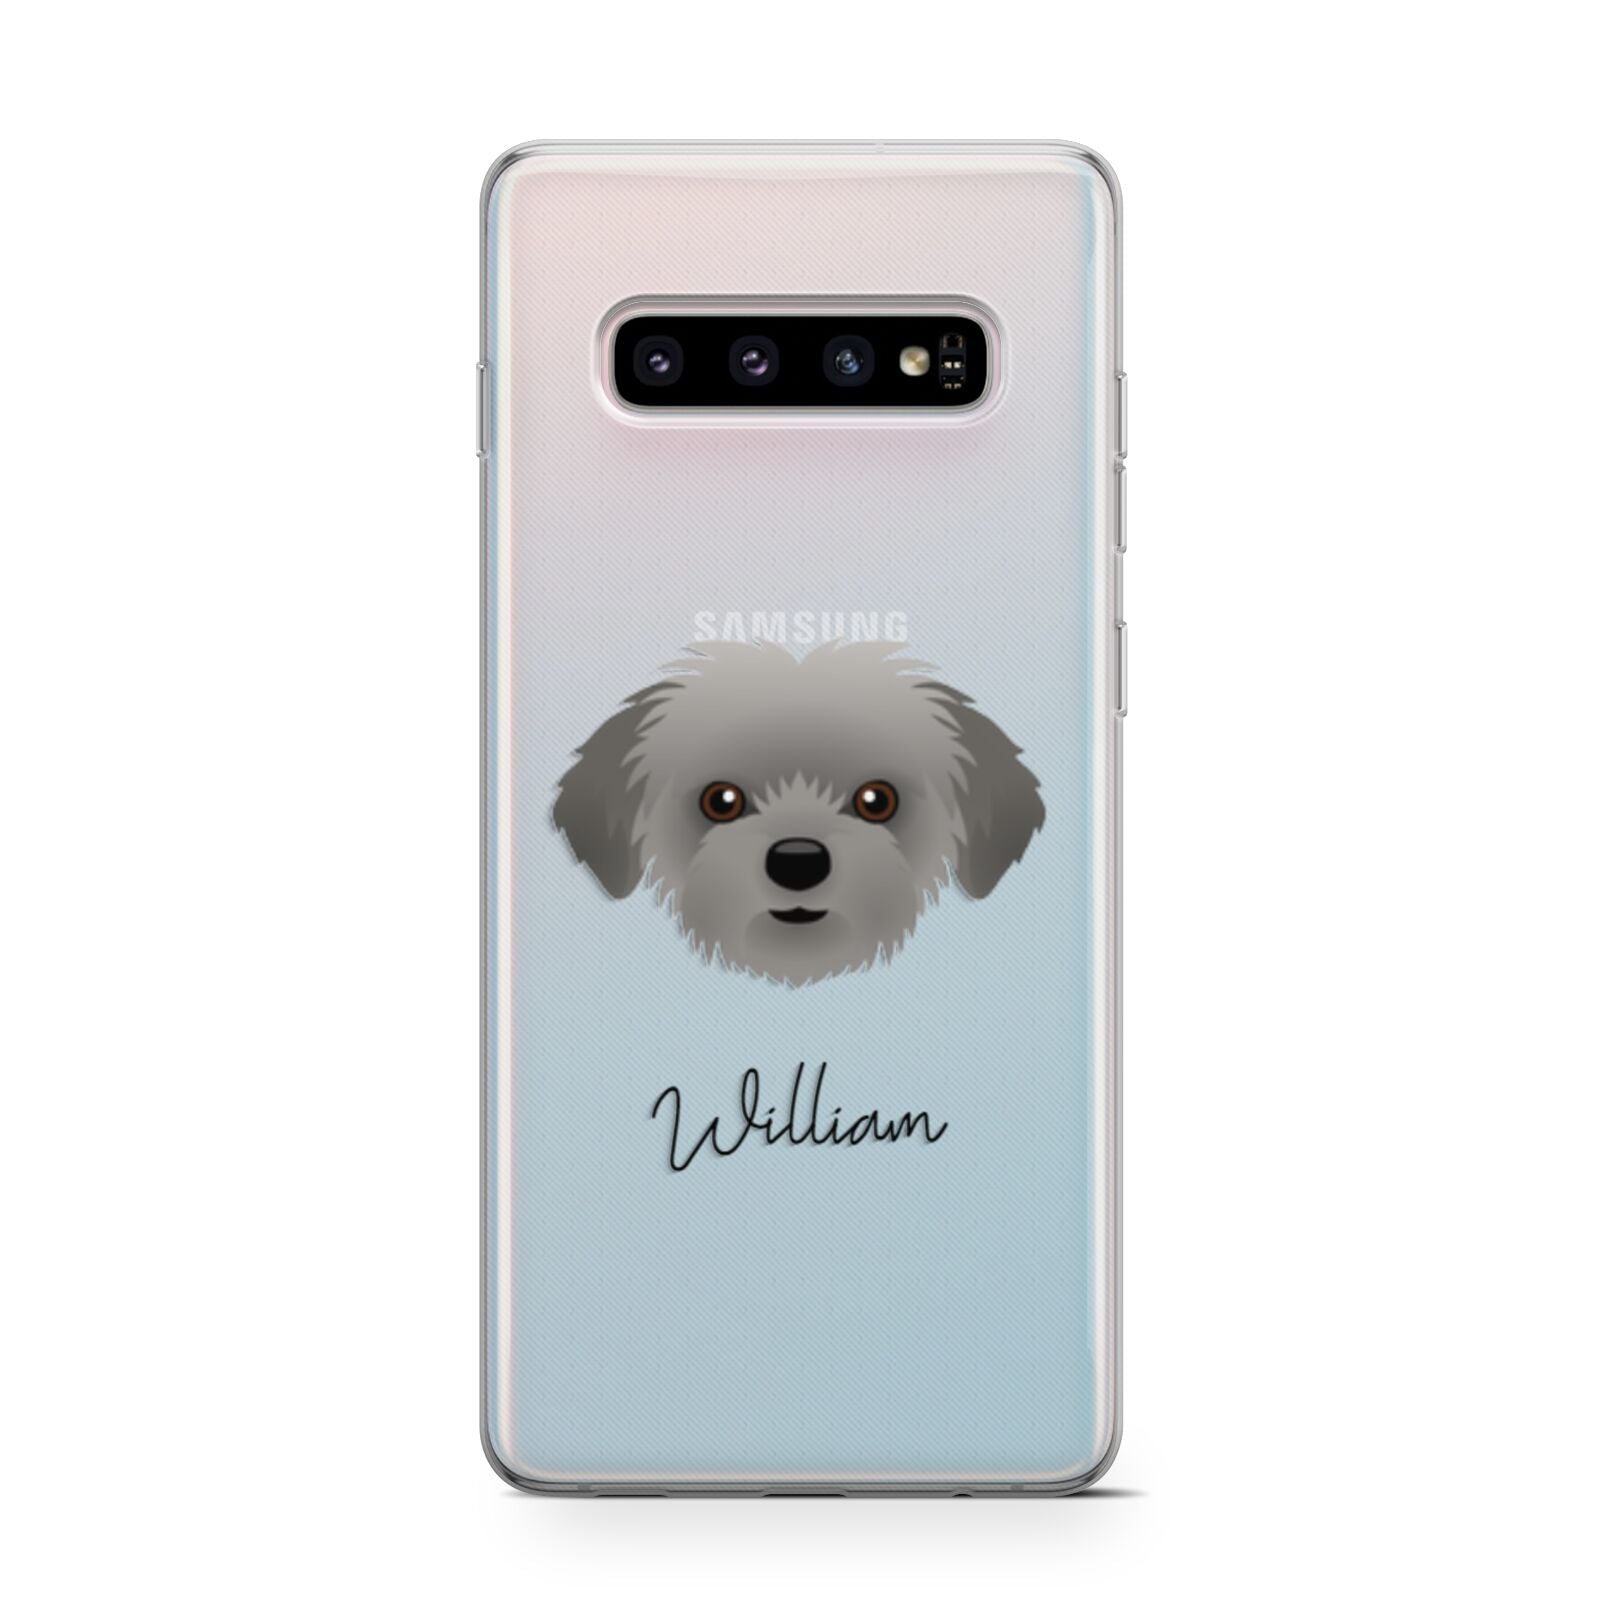 Shorkie Personalised Samsung Galaxy S10 Case